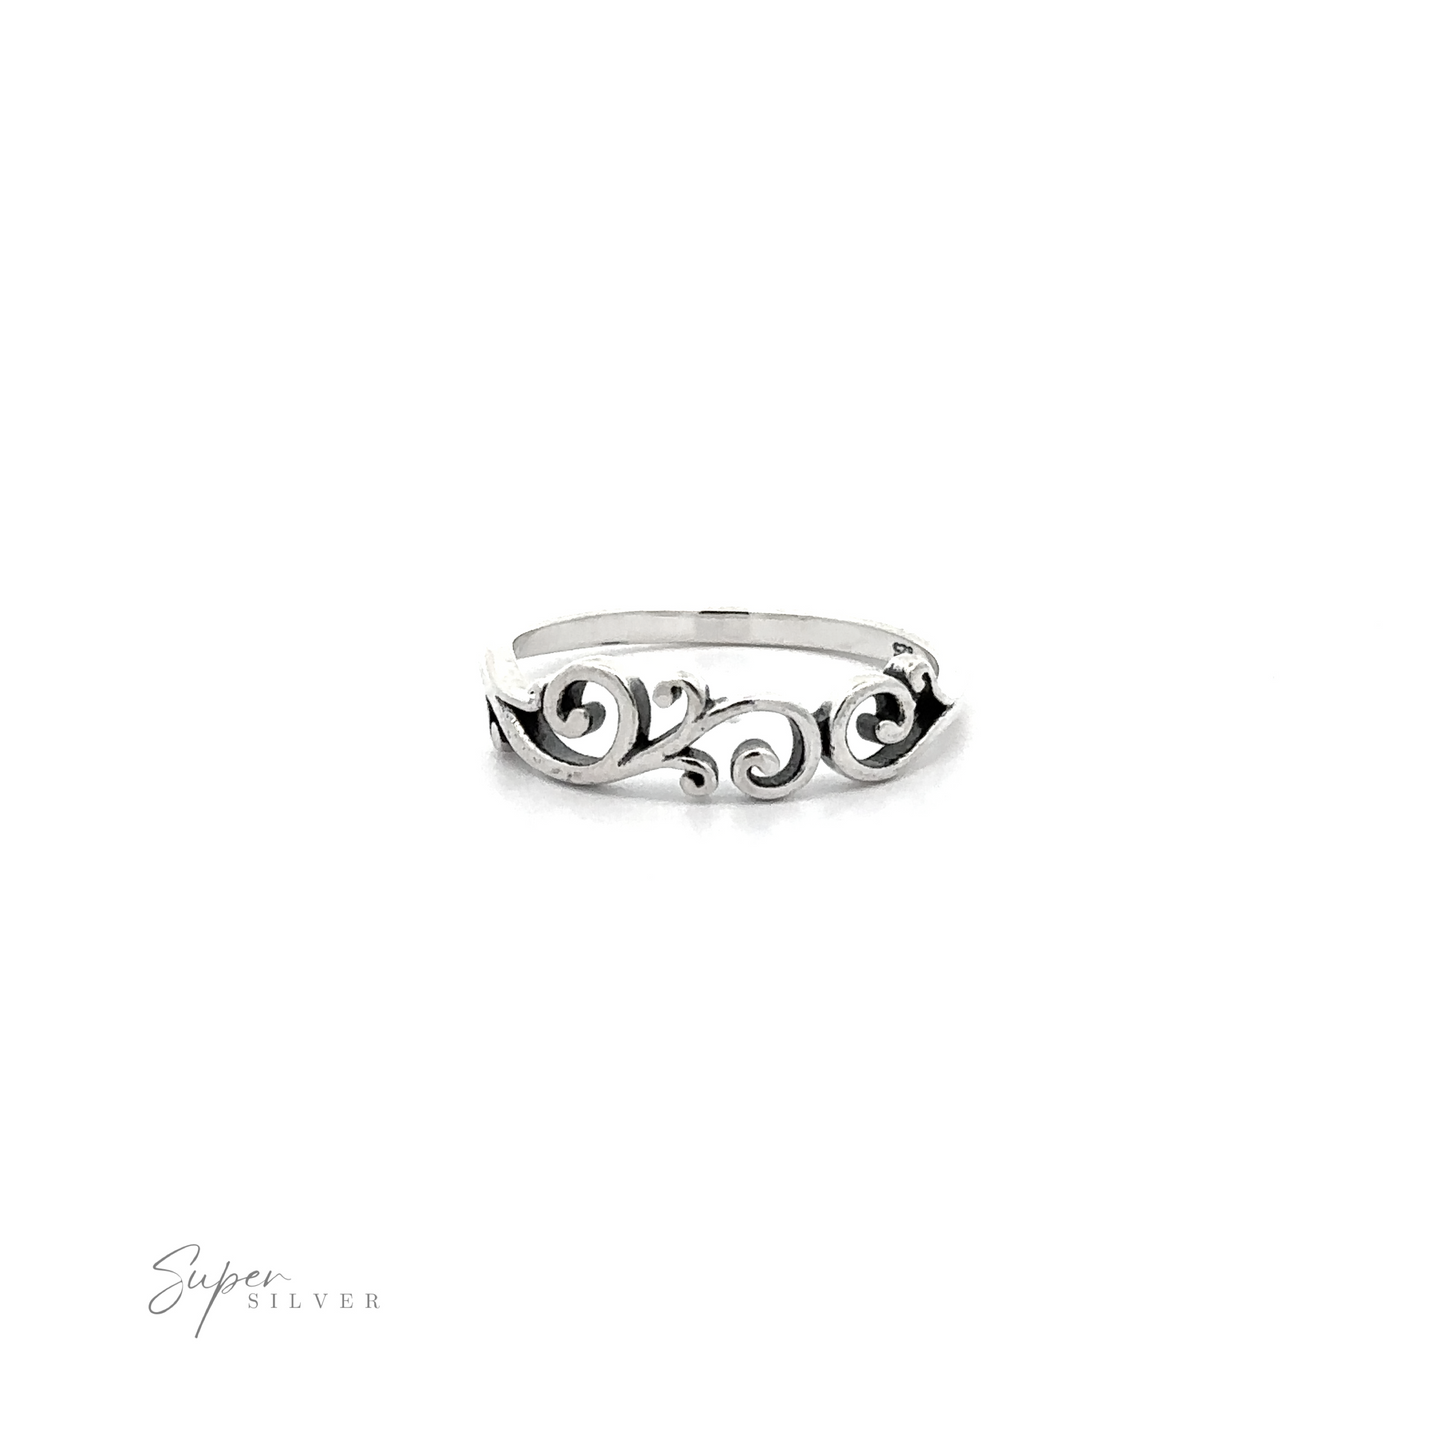 A 925 sterling silver Swirly Ring with a swirl design.